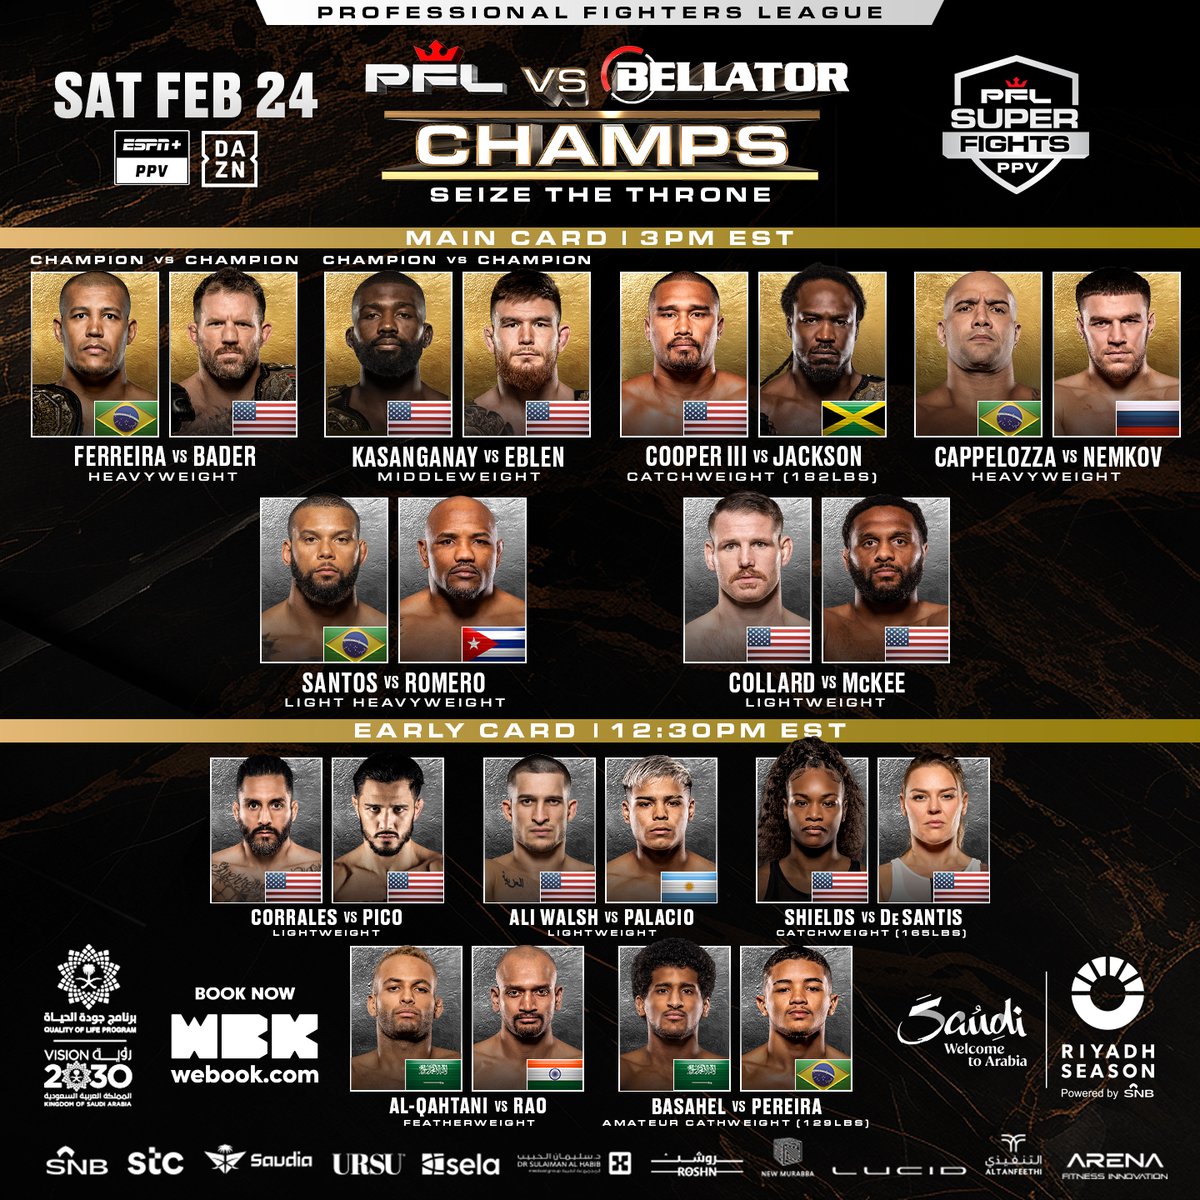 PFL Champs vs. Bellator Champs PPV starts now! The fight is available on ESPN+ in the USA and around the world on DAZN. Tune-in now to see who will Seize the Throne.